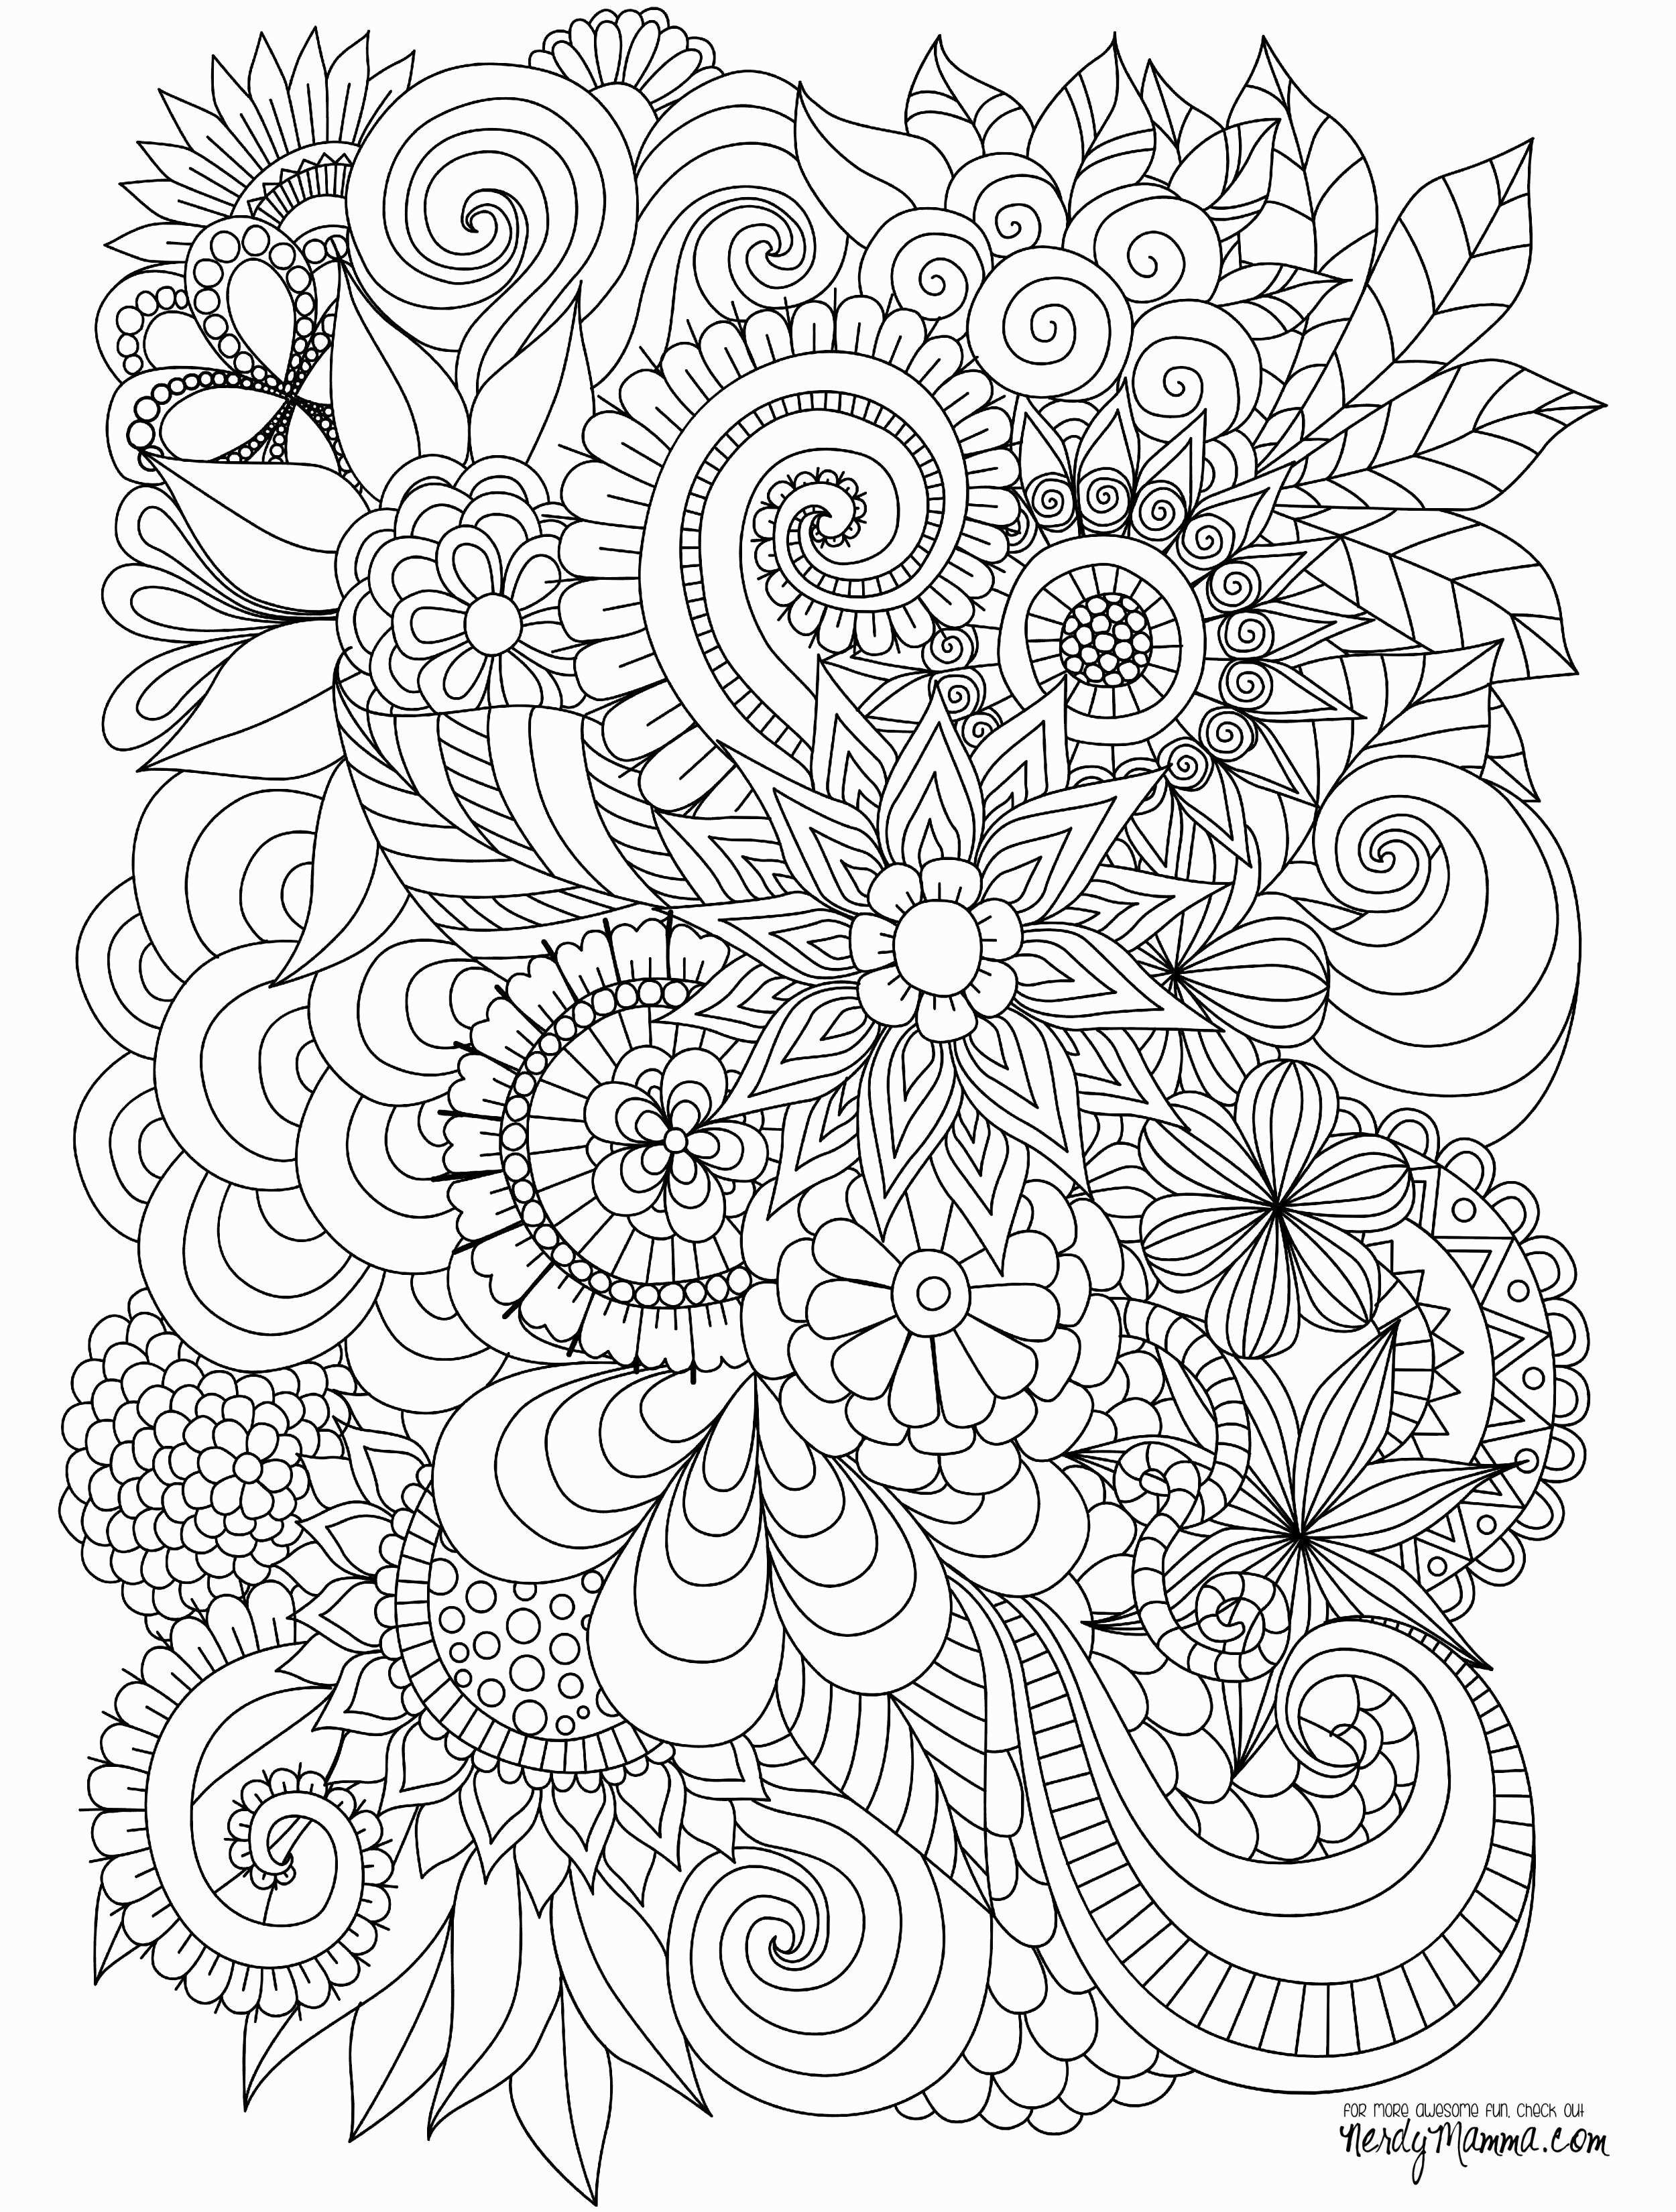 A Turkey Coloring Page Wallpaper